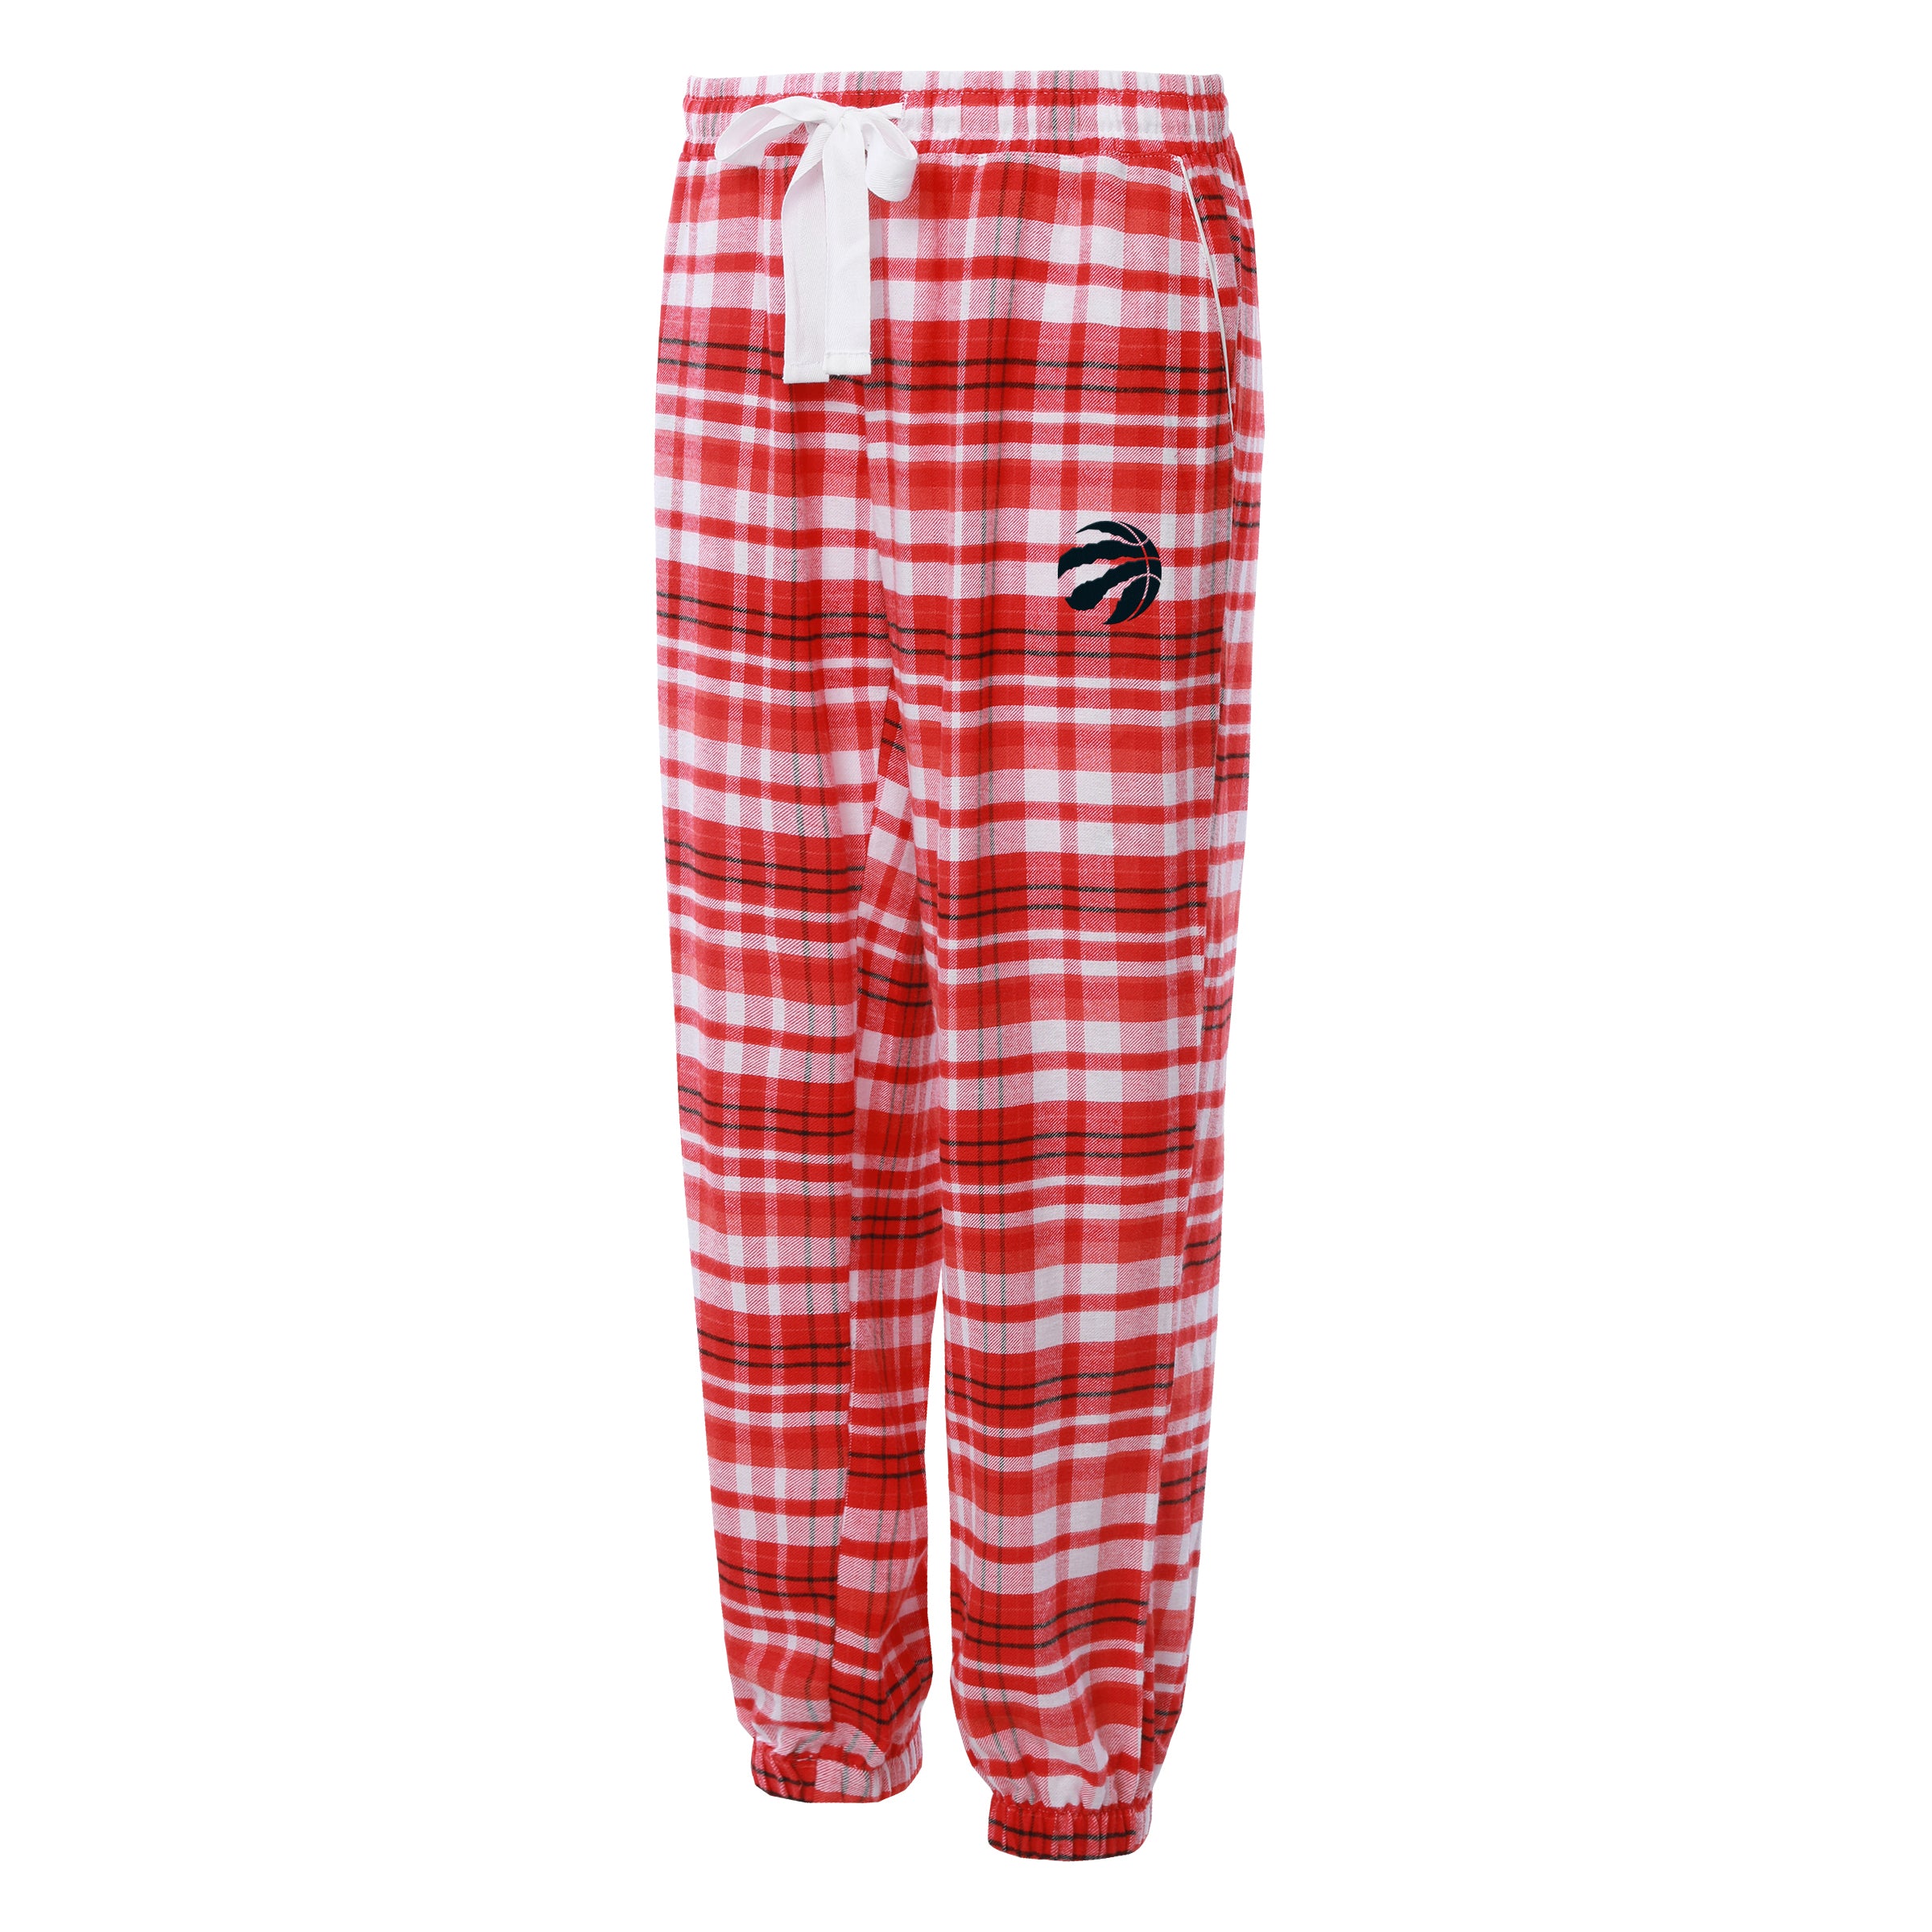 Life is Good Pajama Pants for Women for sale | eBay